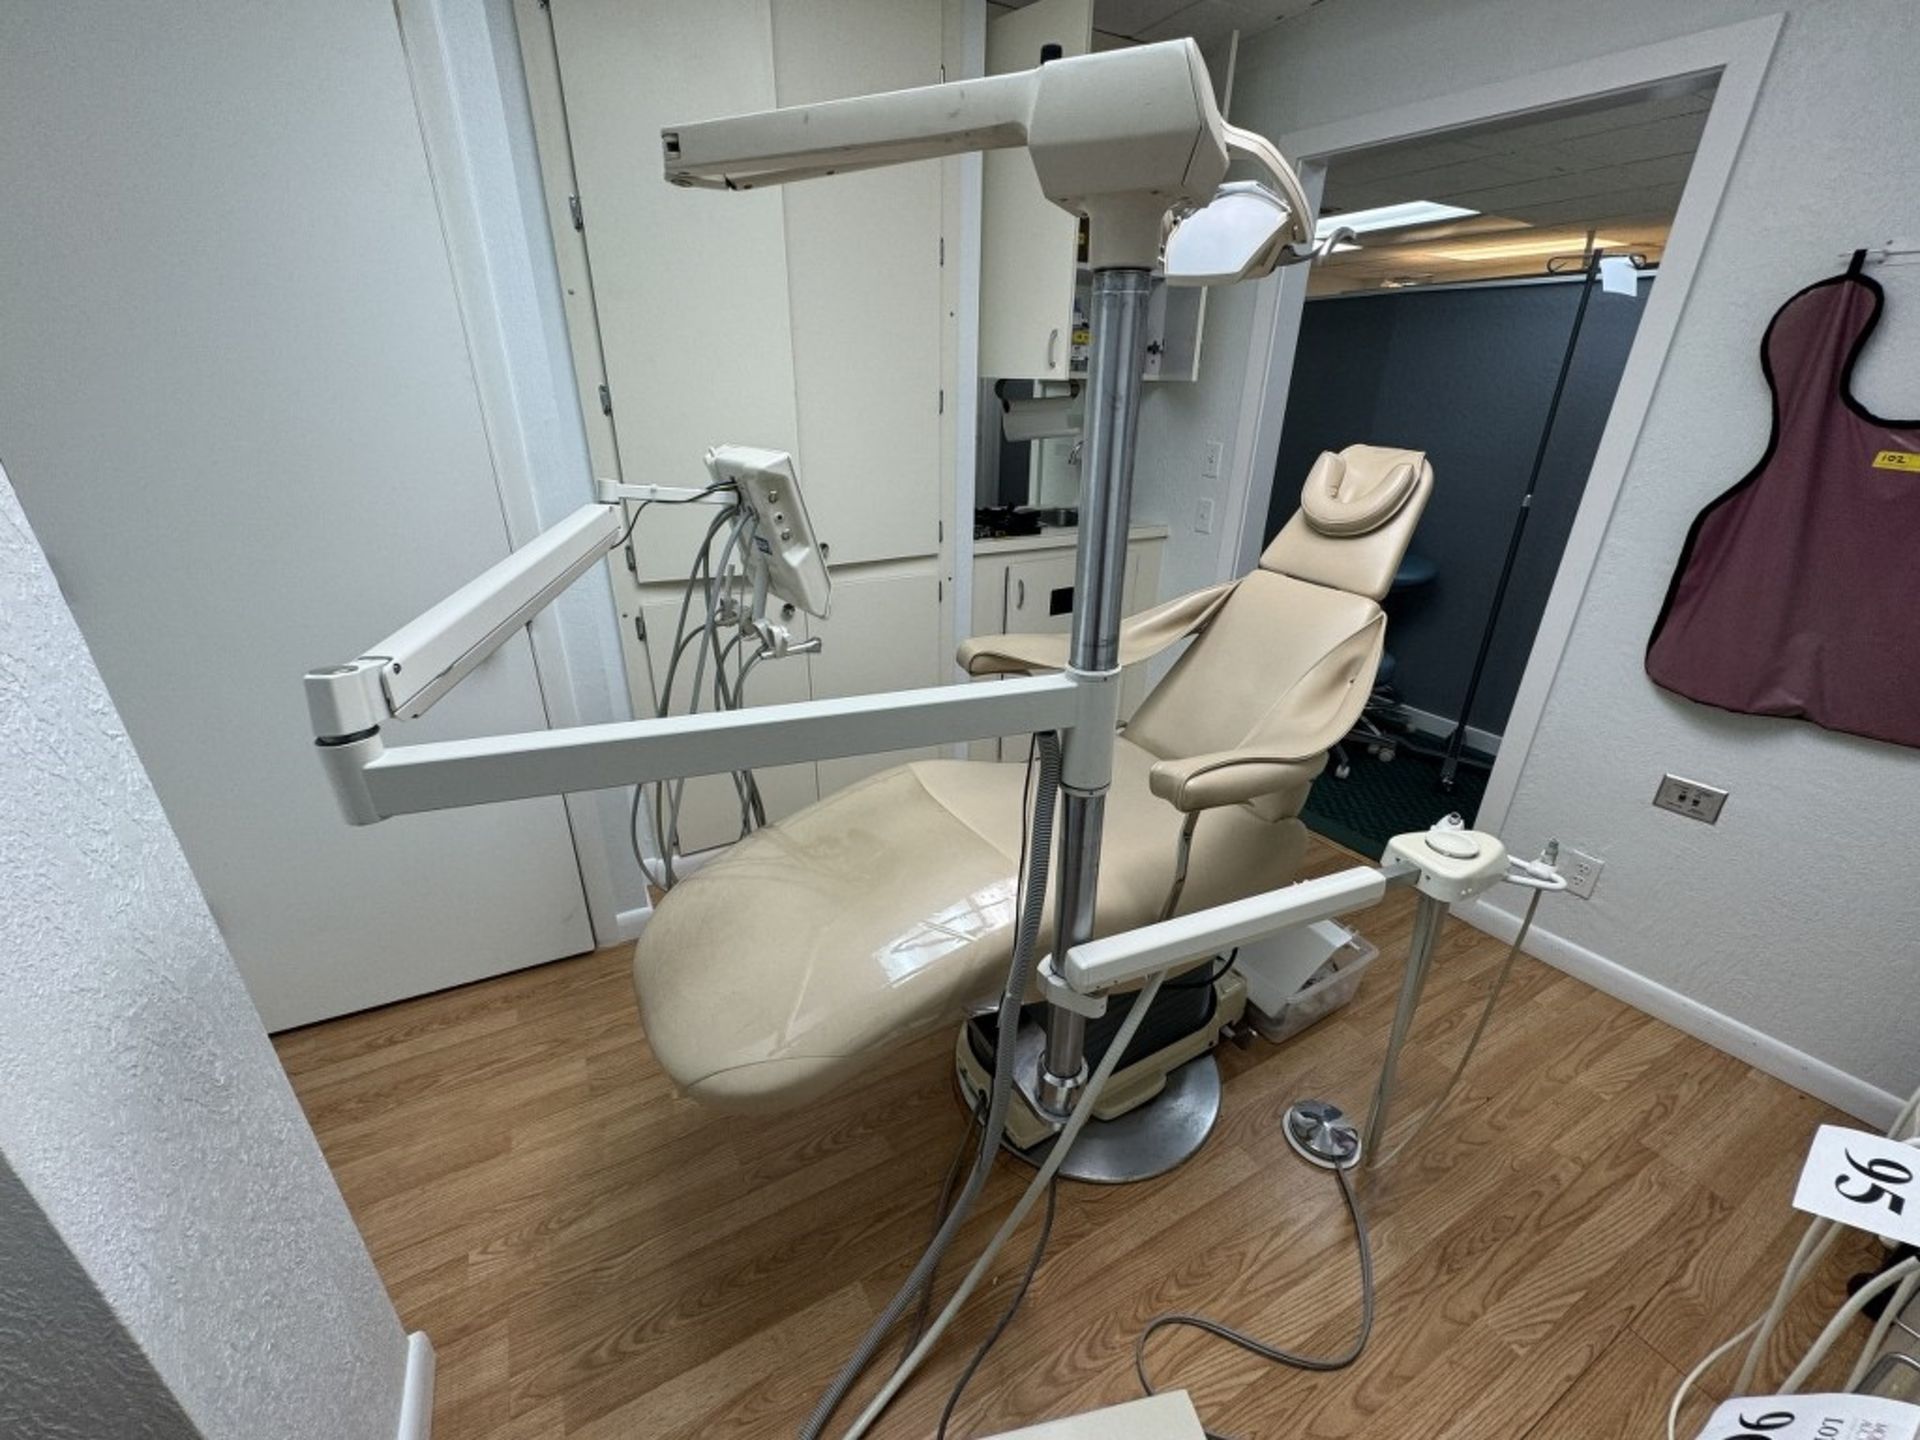 BEVER STATE DENTAL PATIENT CHAIR - Image 4 of 9